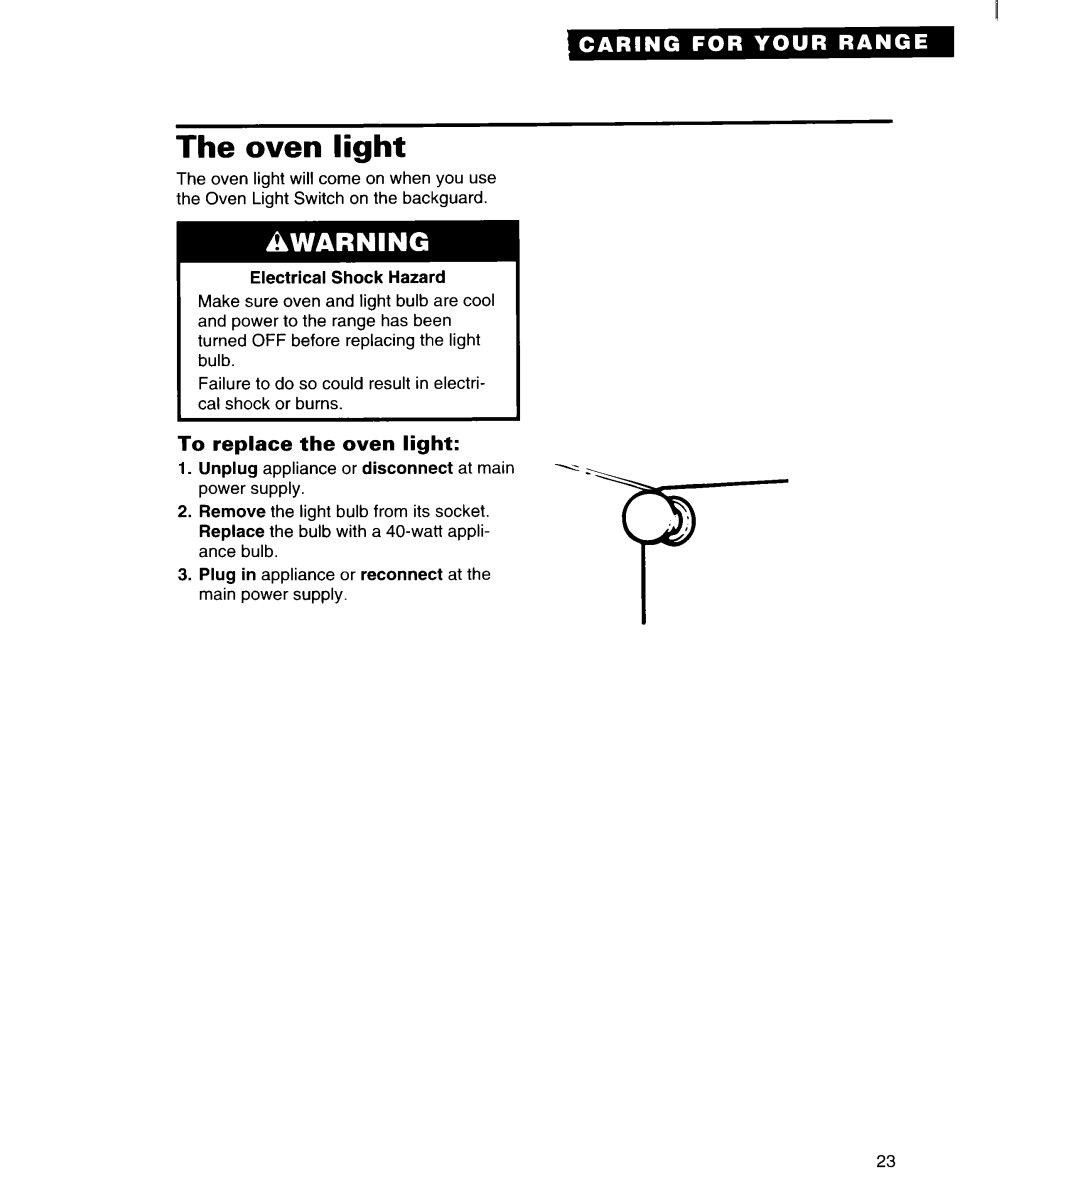 Estate TGRGIWZB manual The oven light, To replace the oven light 